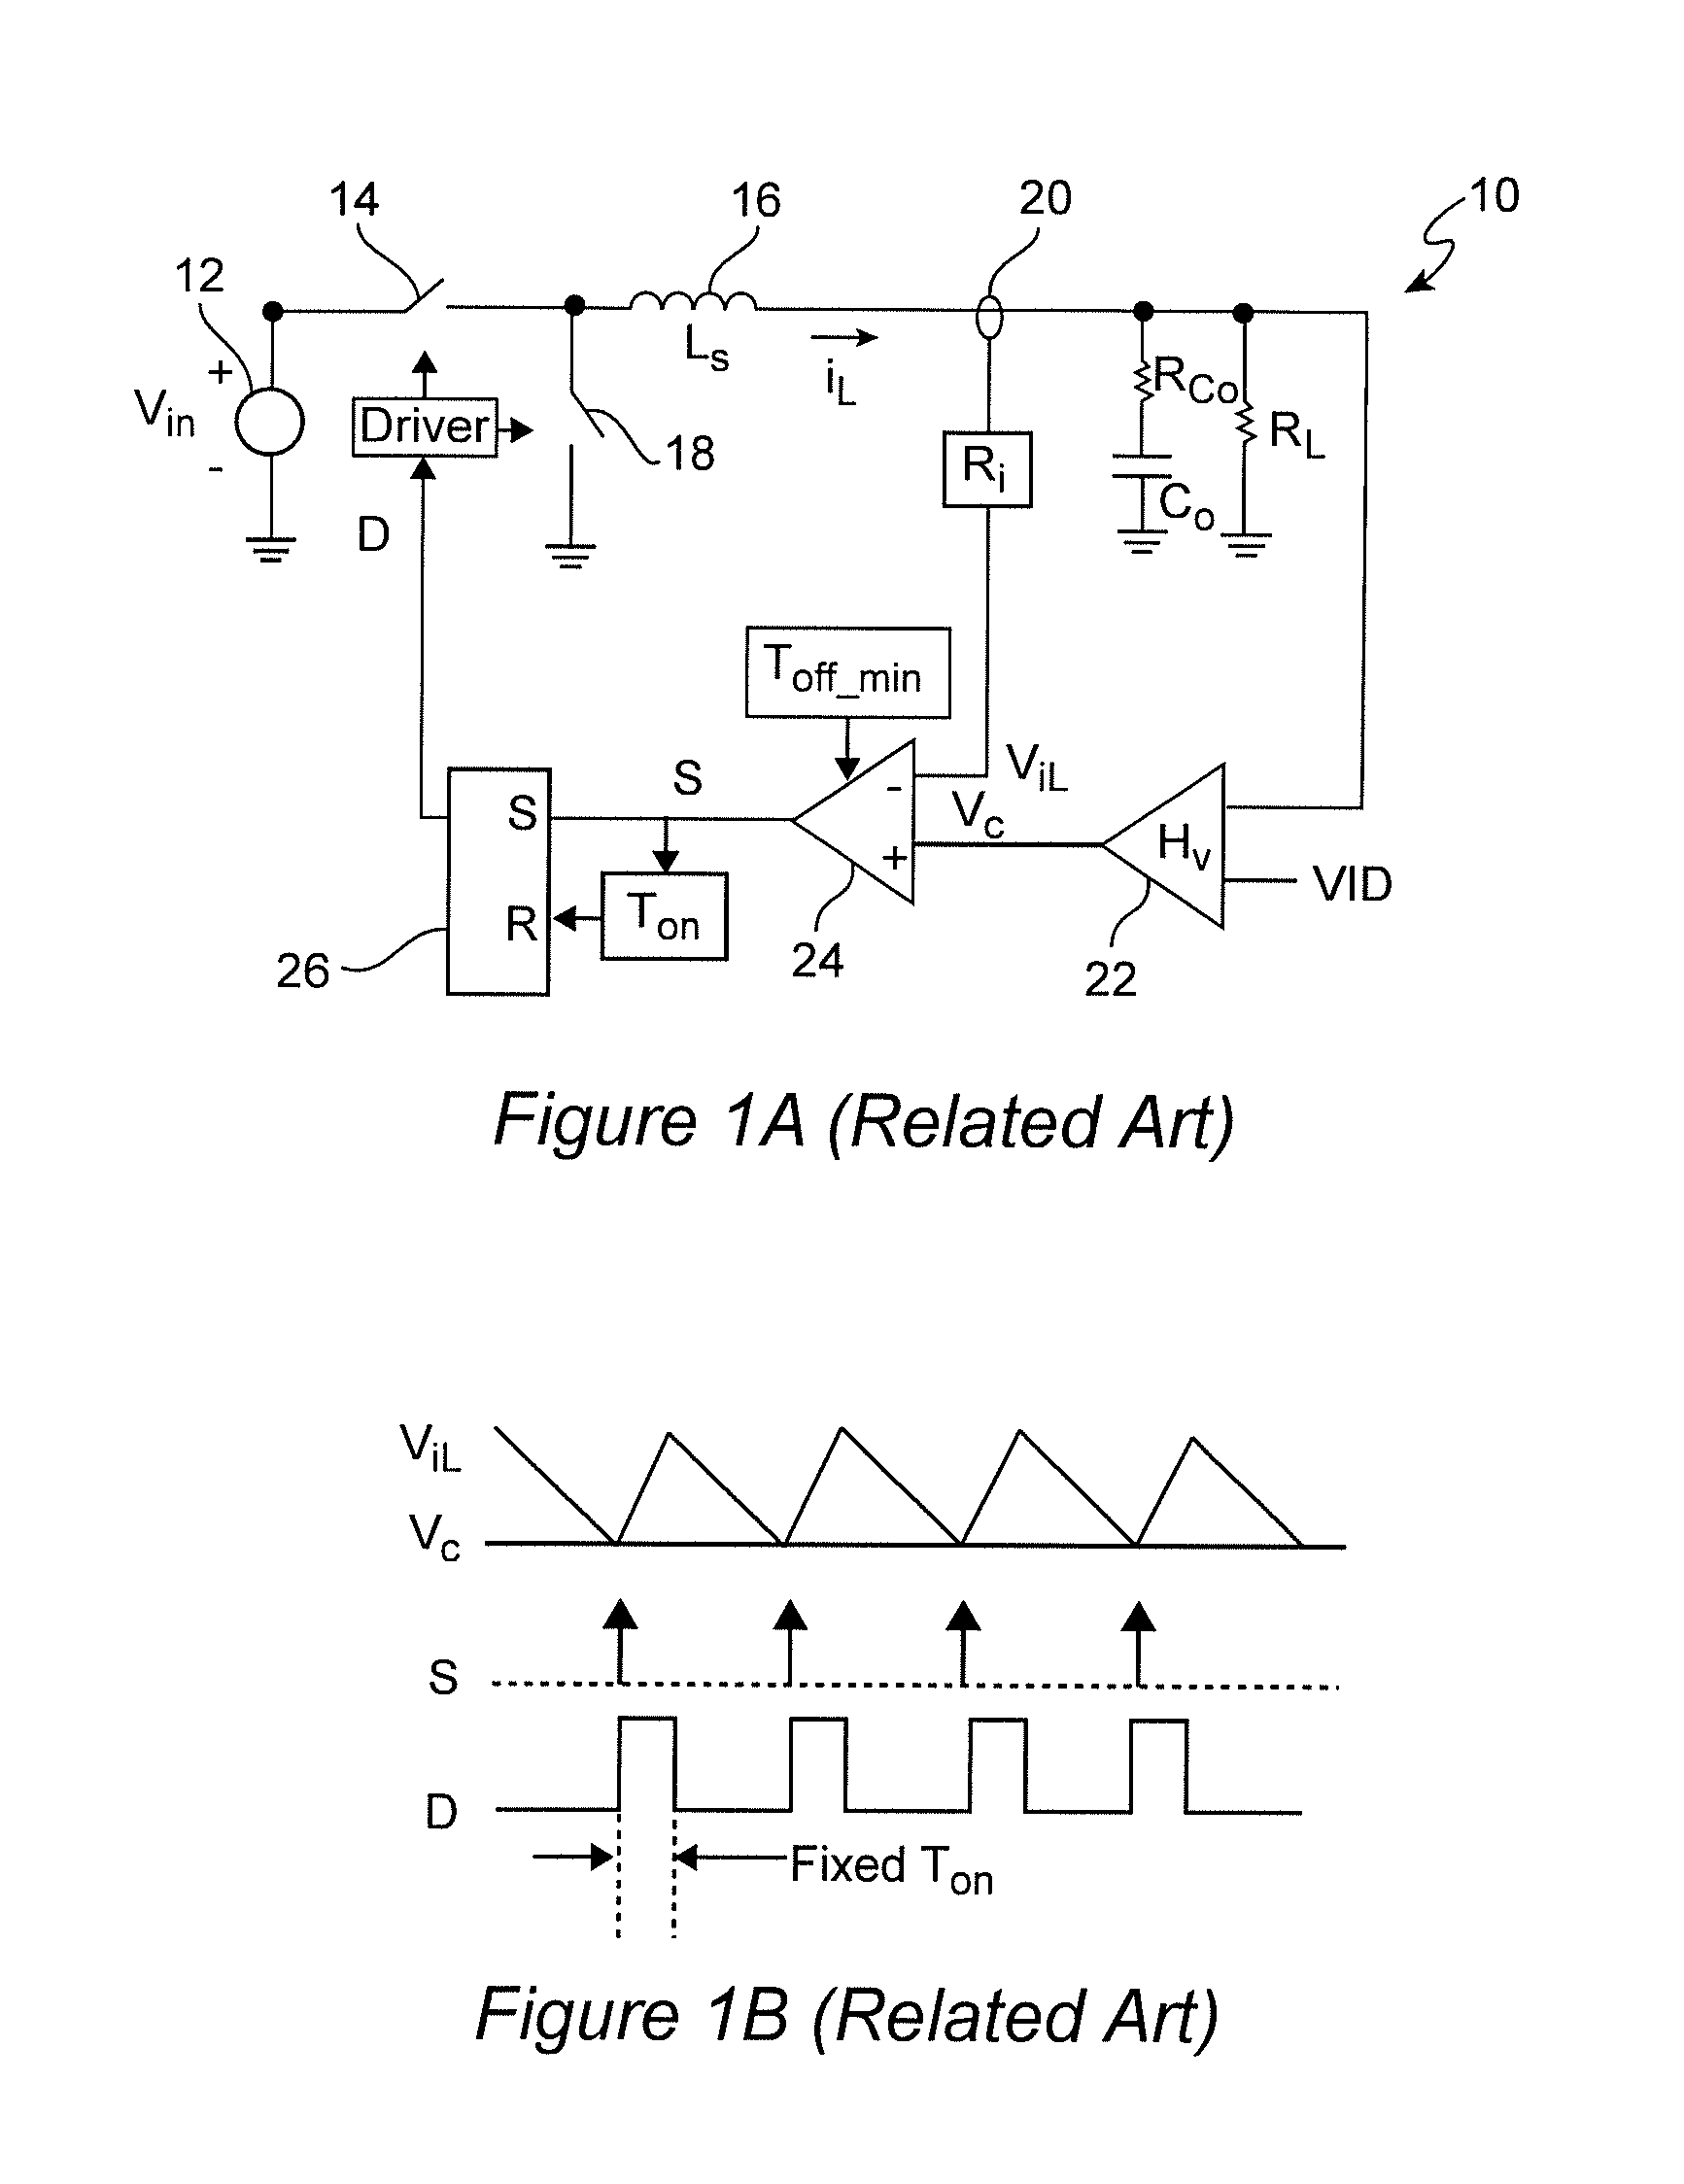 Transient Performance Improvement for Constant On-Time Power Converters